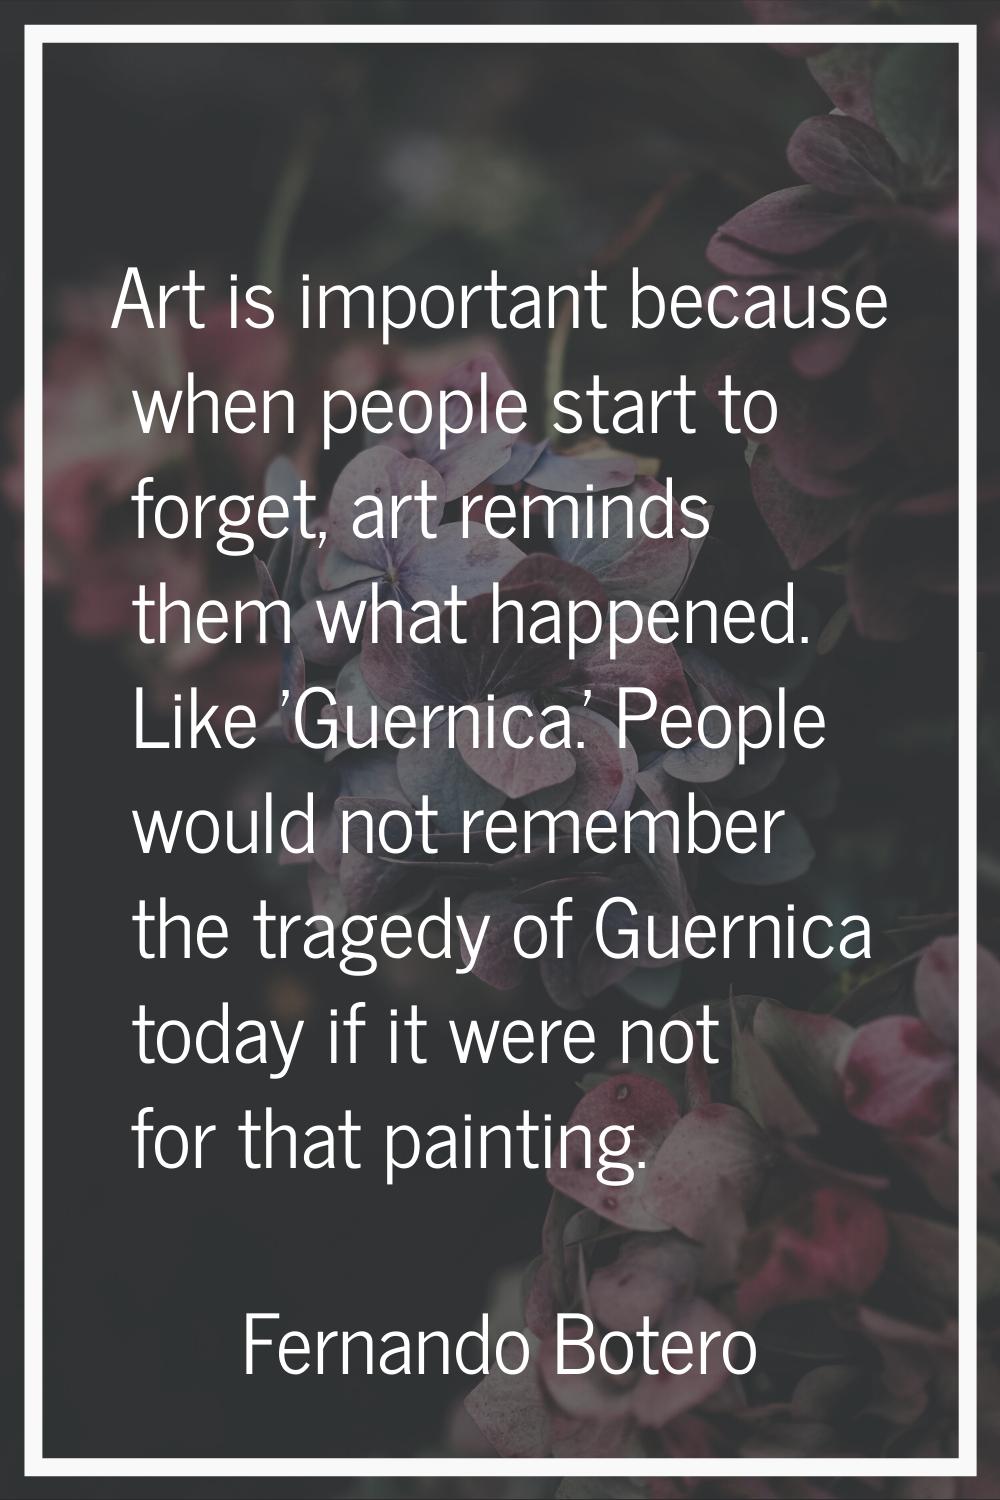 Art is important because when people start to forget, art reminds them what happened. Like 'Guernic